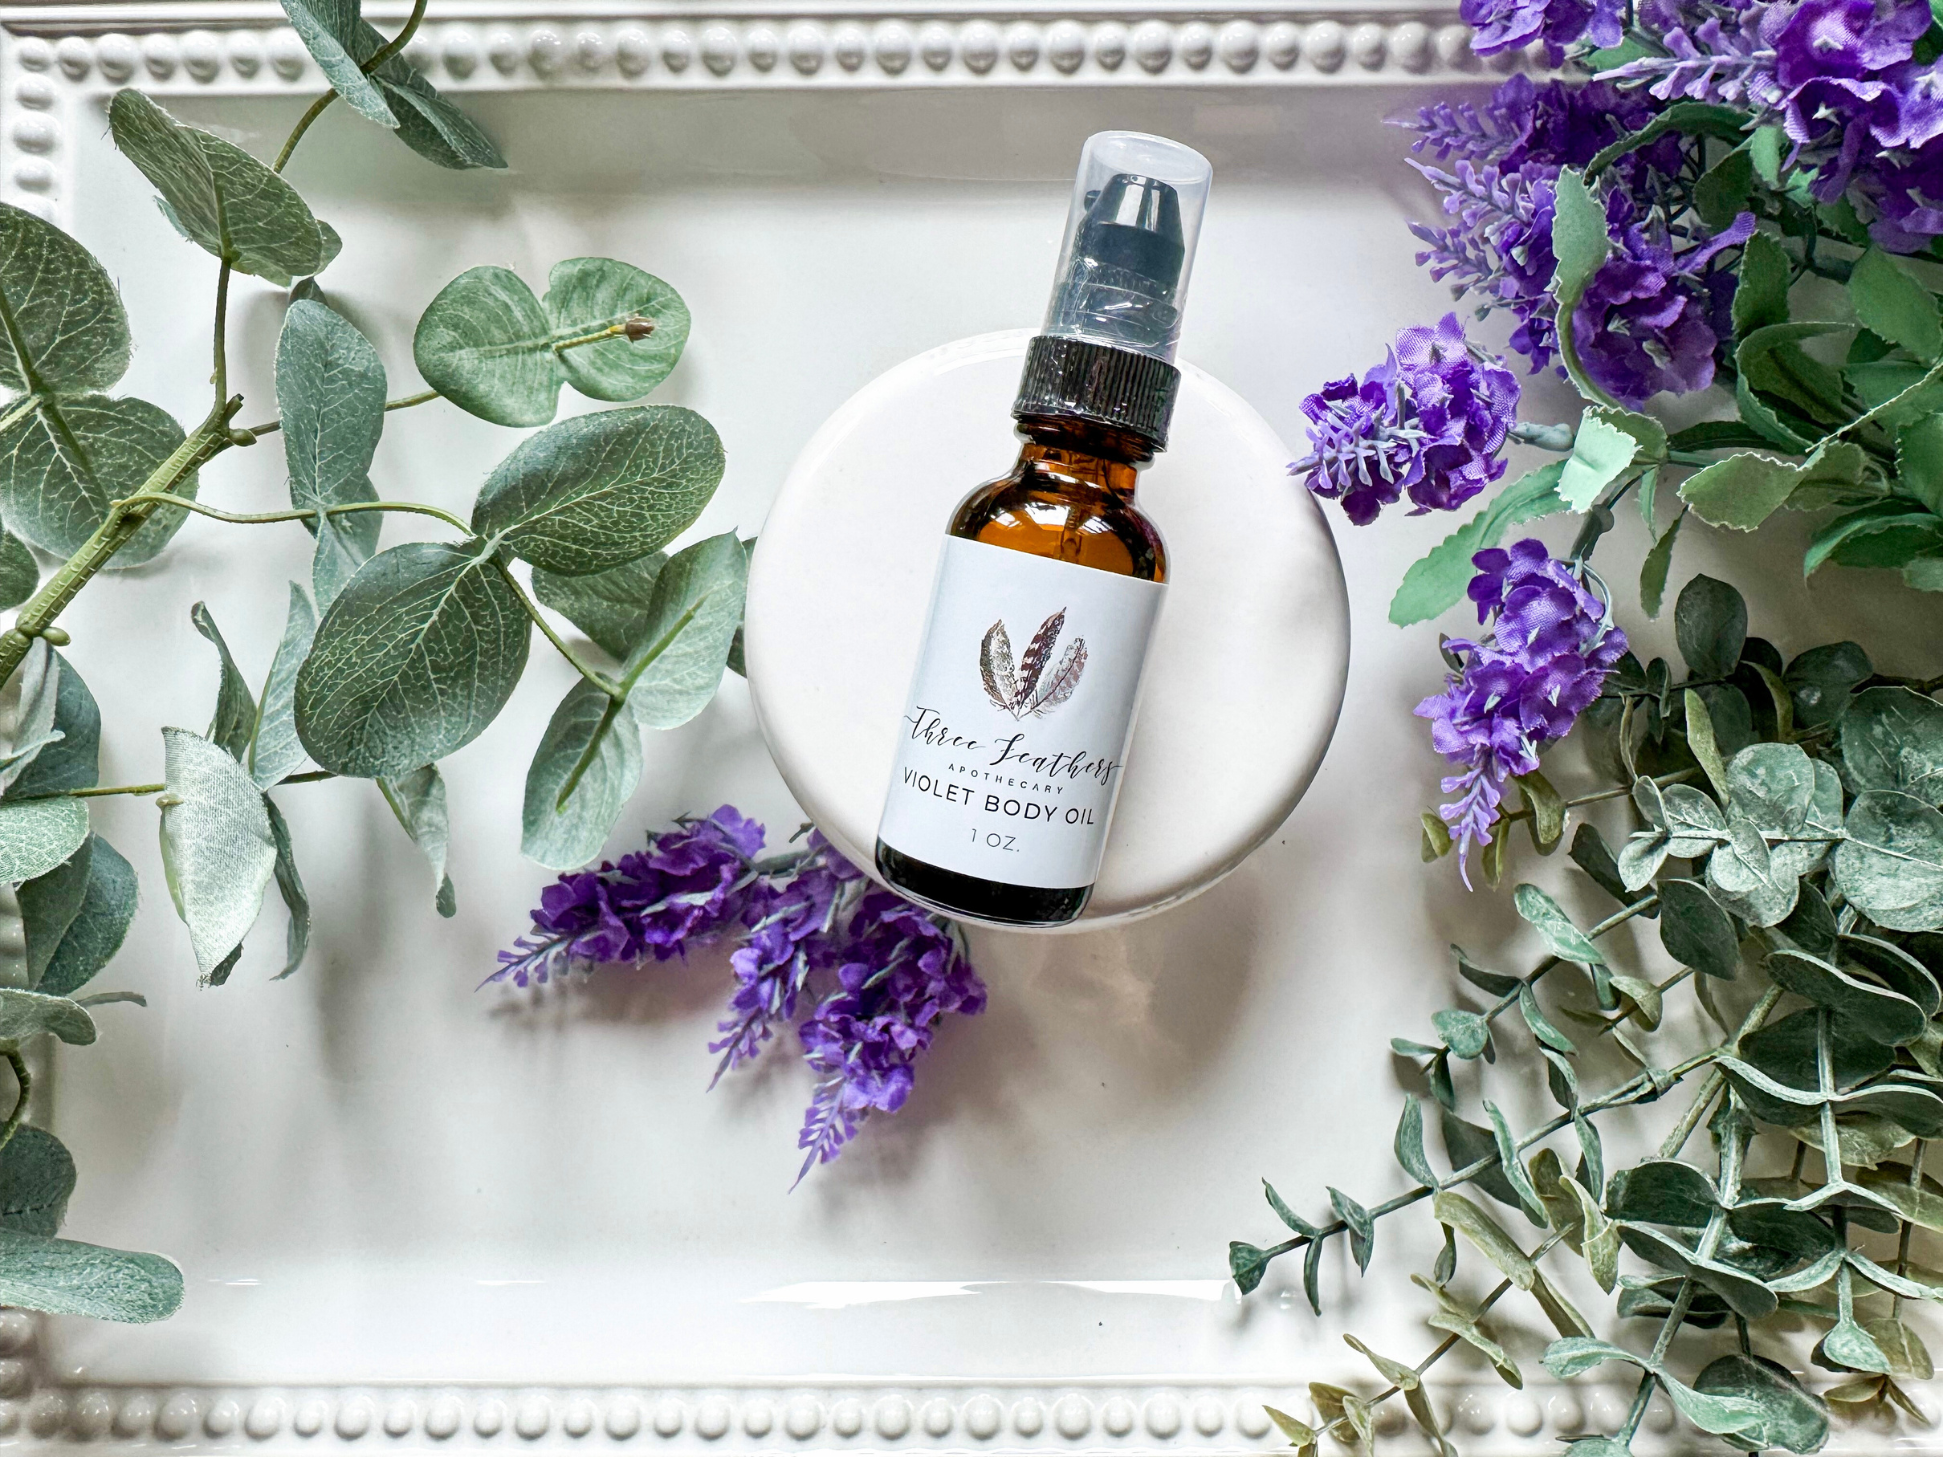 Violet Limited Edition Egyptian Body Oil || Three Feathers Apothecary